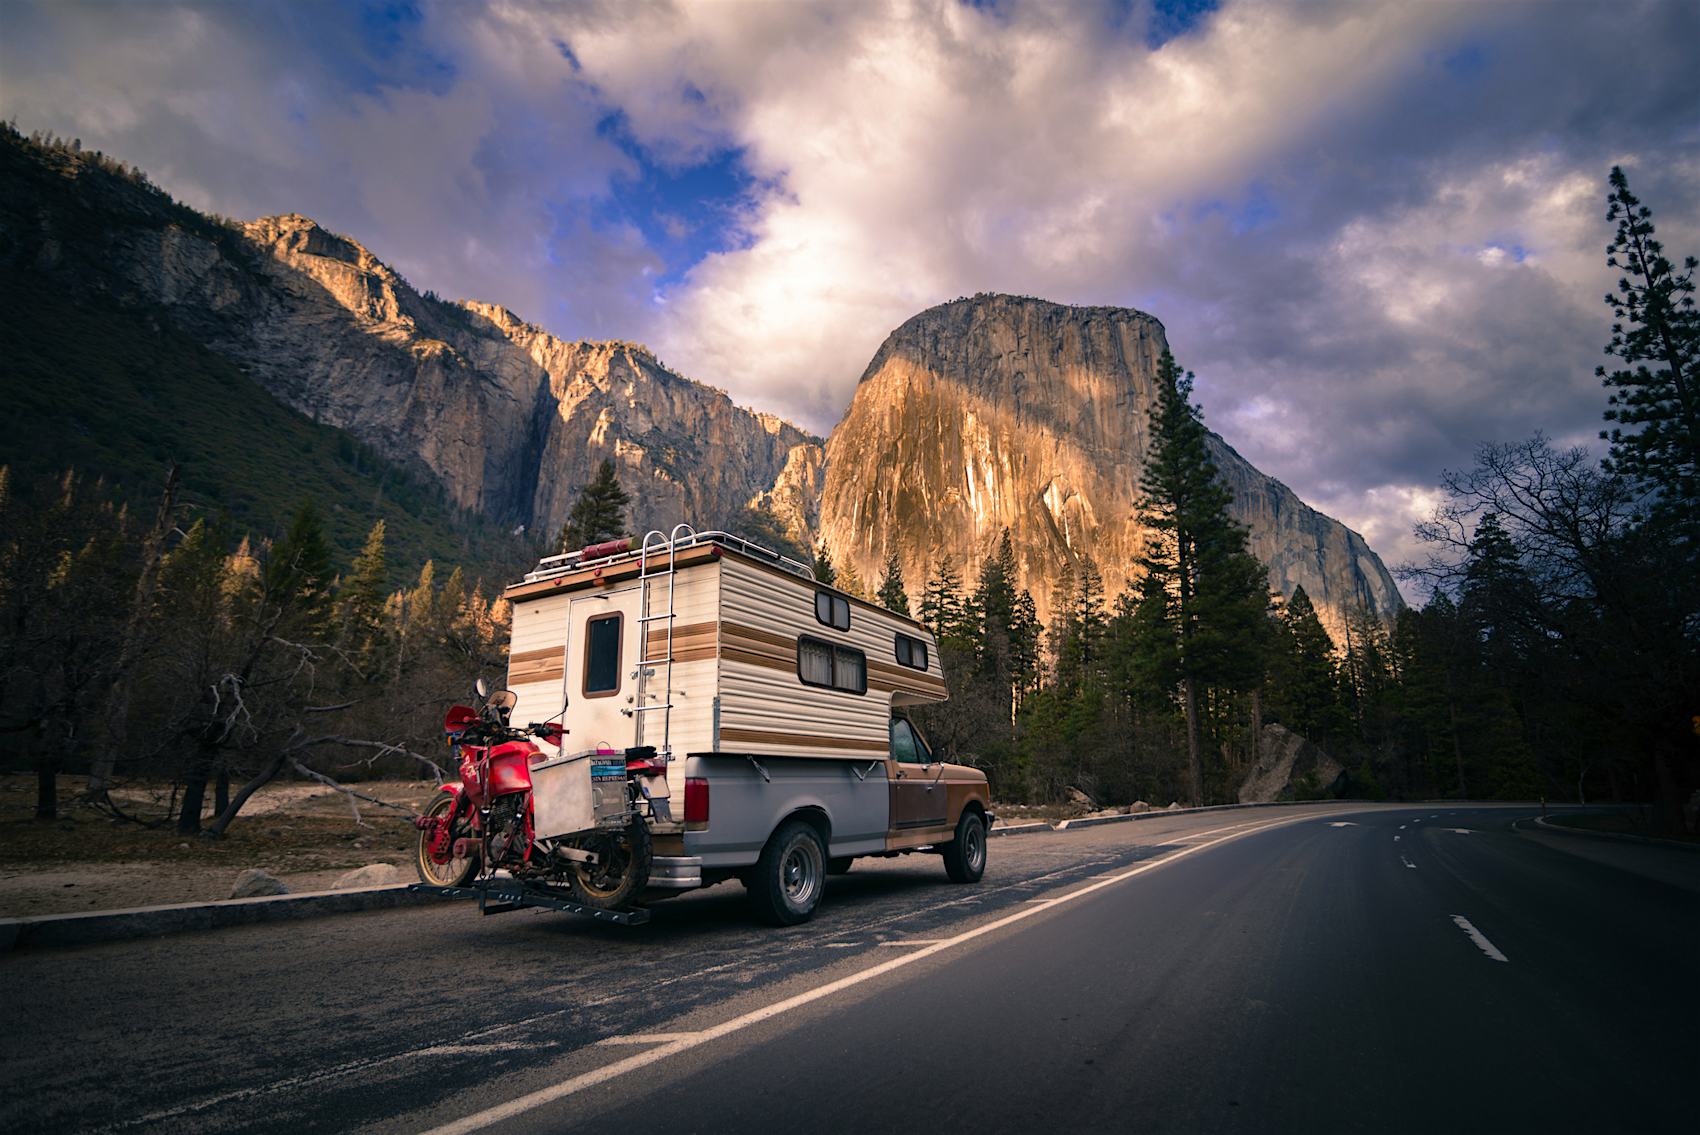 Enjoy the flexibility and incredible scenery when road tripping around the USA in a camper van 